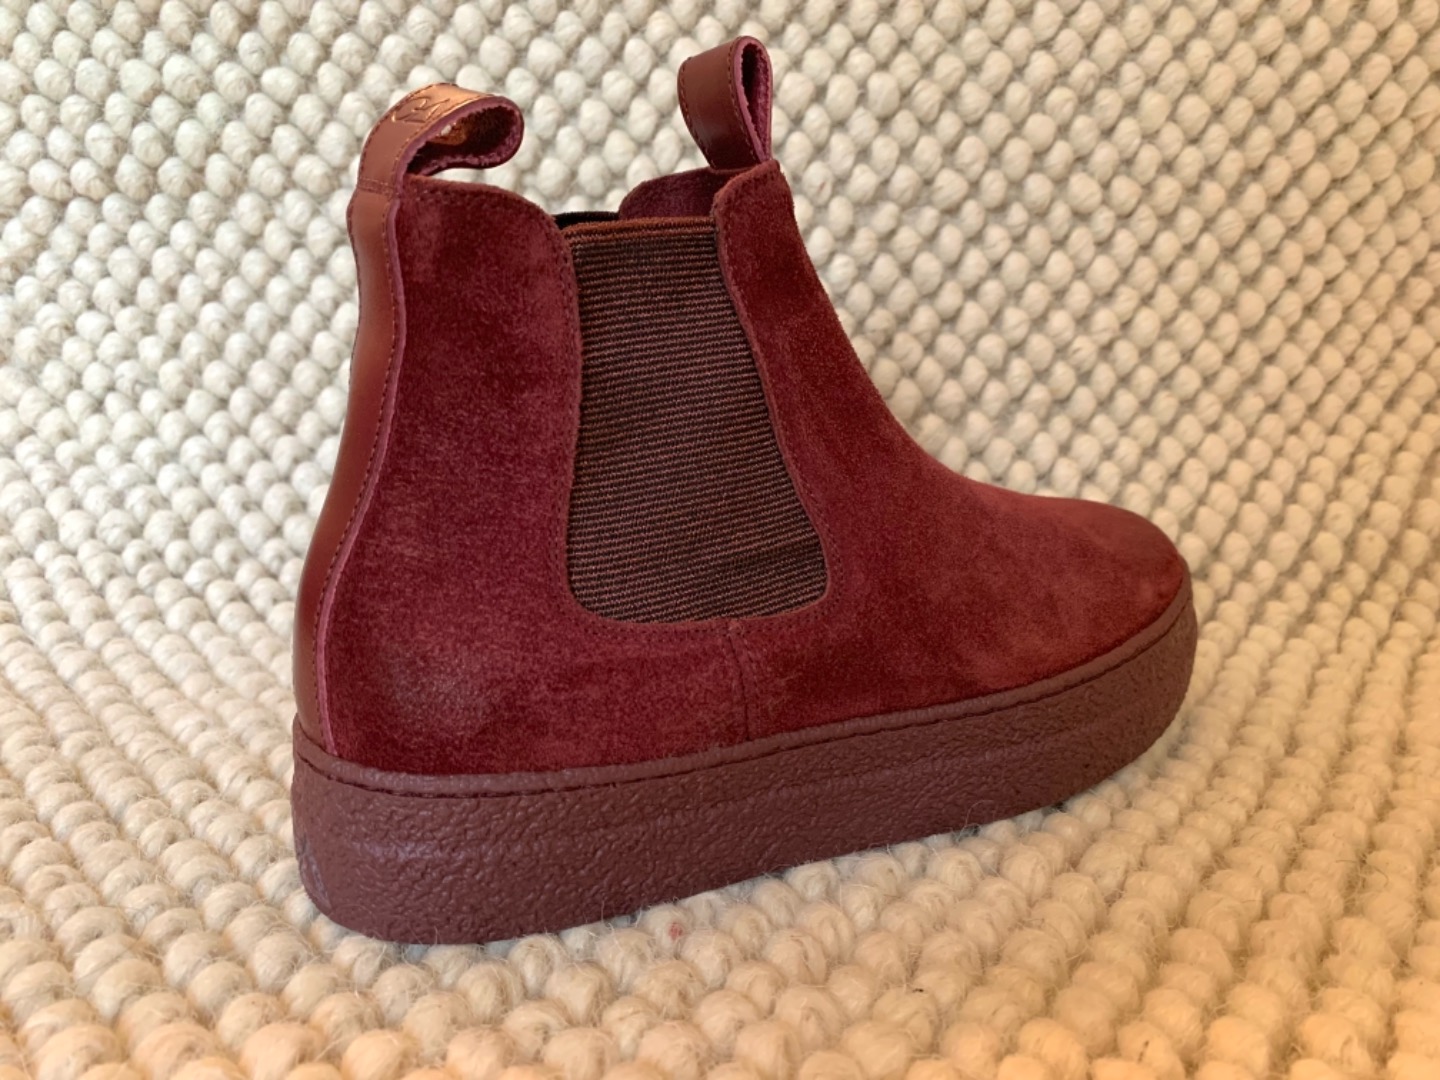 Oa non-fashion - A Wow Bordo - lined with wool 2